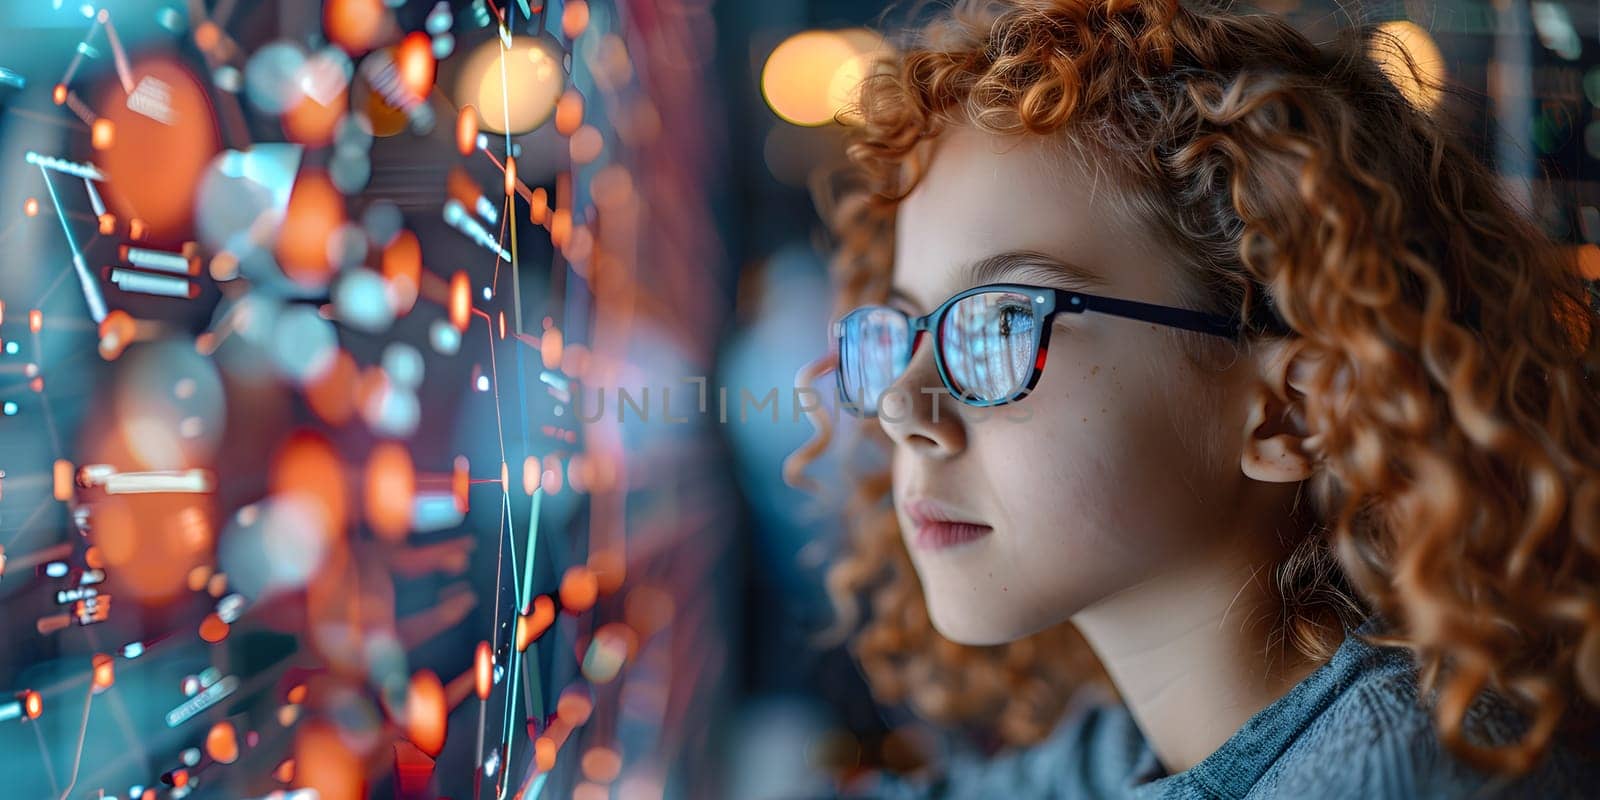 Young girl with glasses and black hair happily looking at computer screen by Nadtochiy